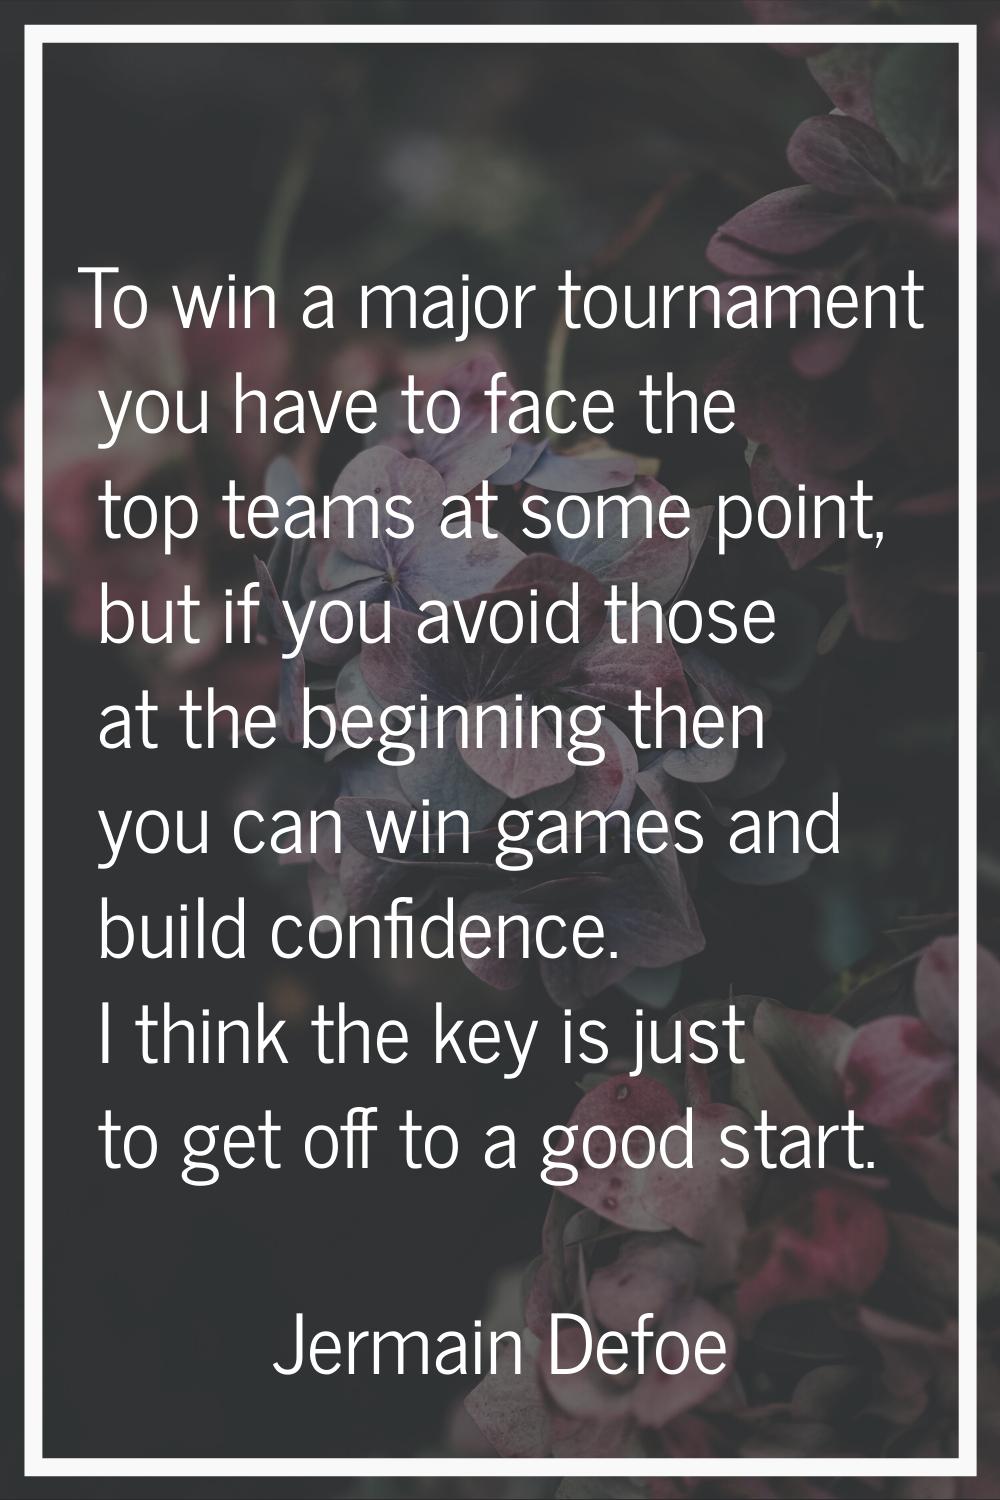 To win a major tournament you have to face the top teams at some point, but if you avoid those at t